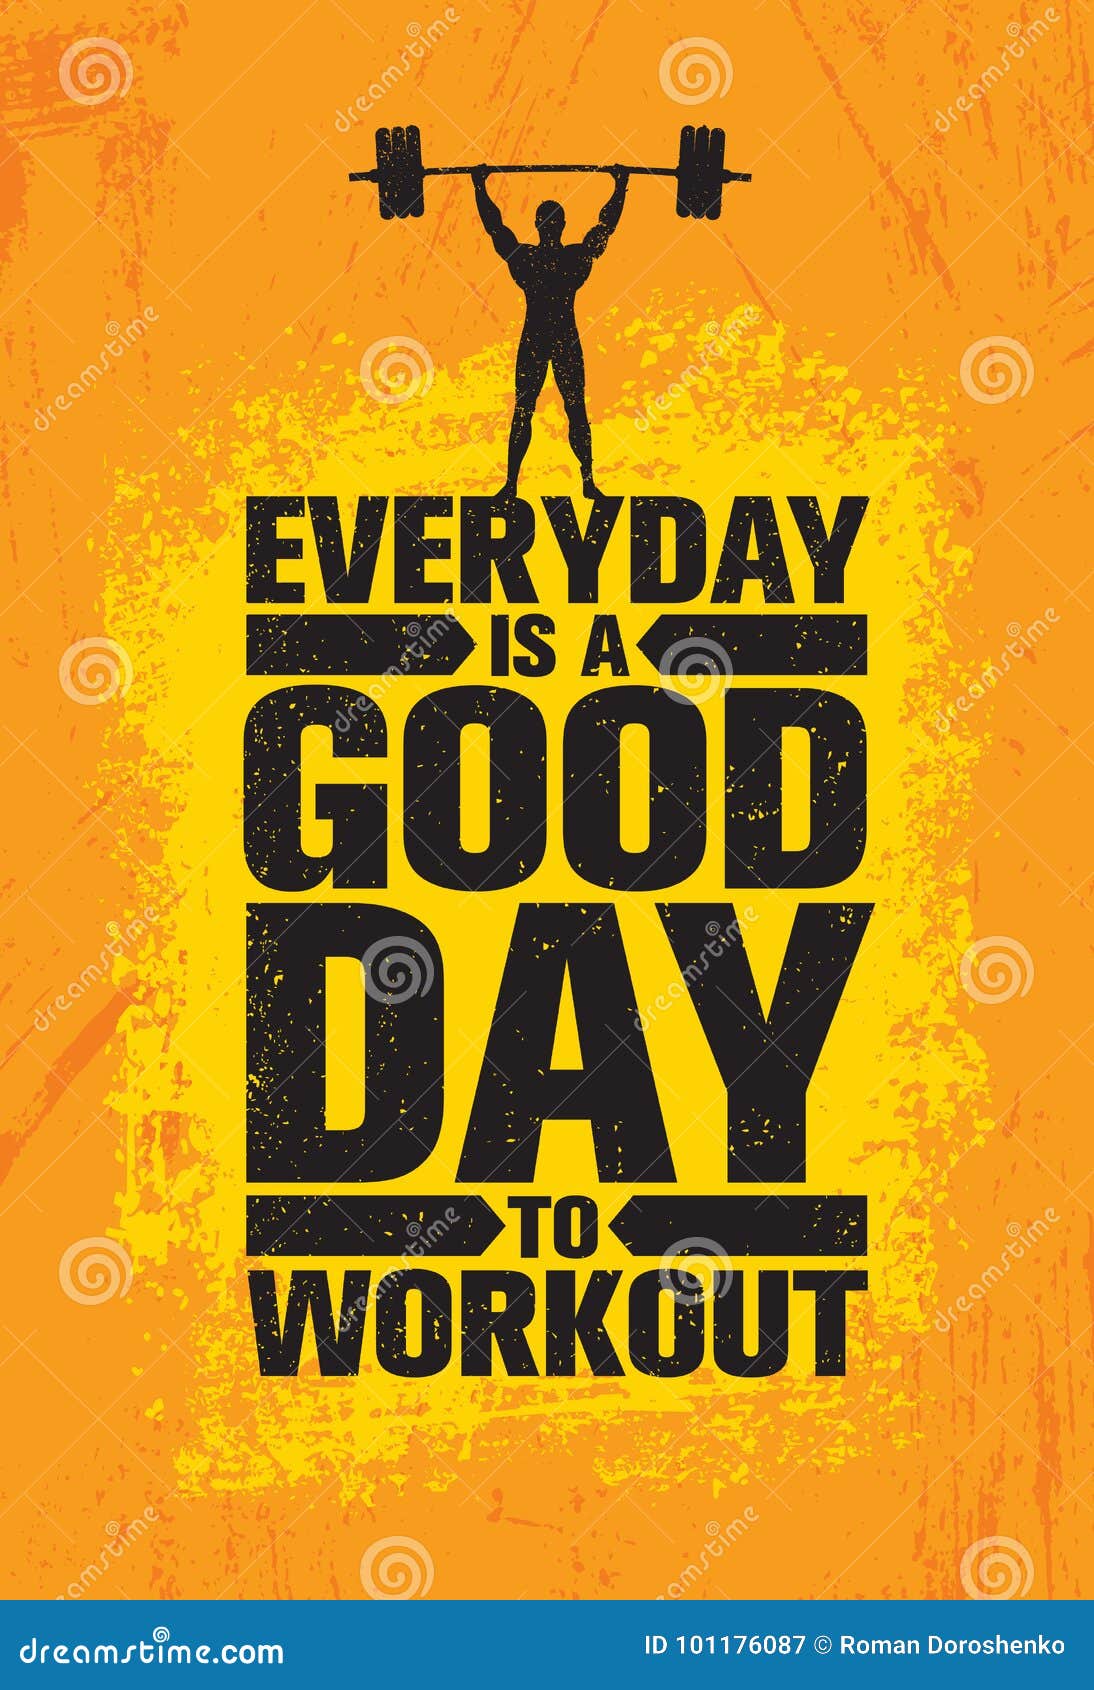 6 Day Is gym good everyday 